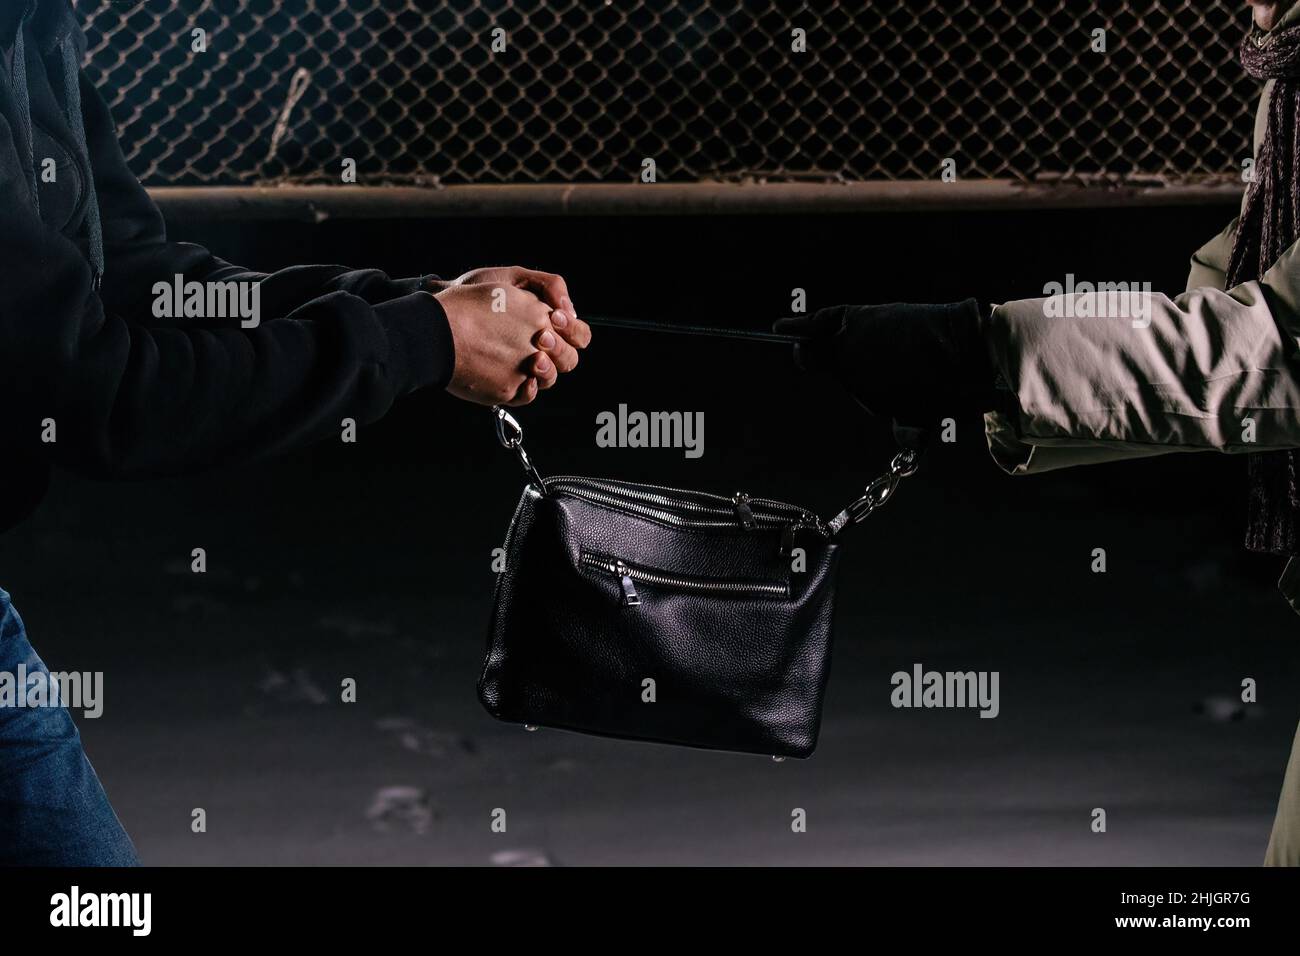 Crime scene. Robber trying to snatch bag, close up. Stock Photo